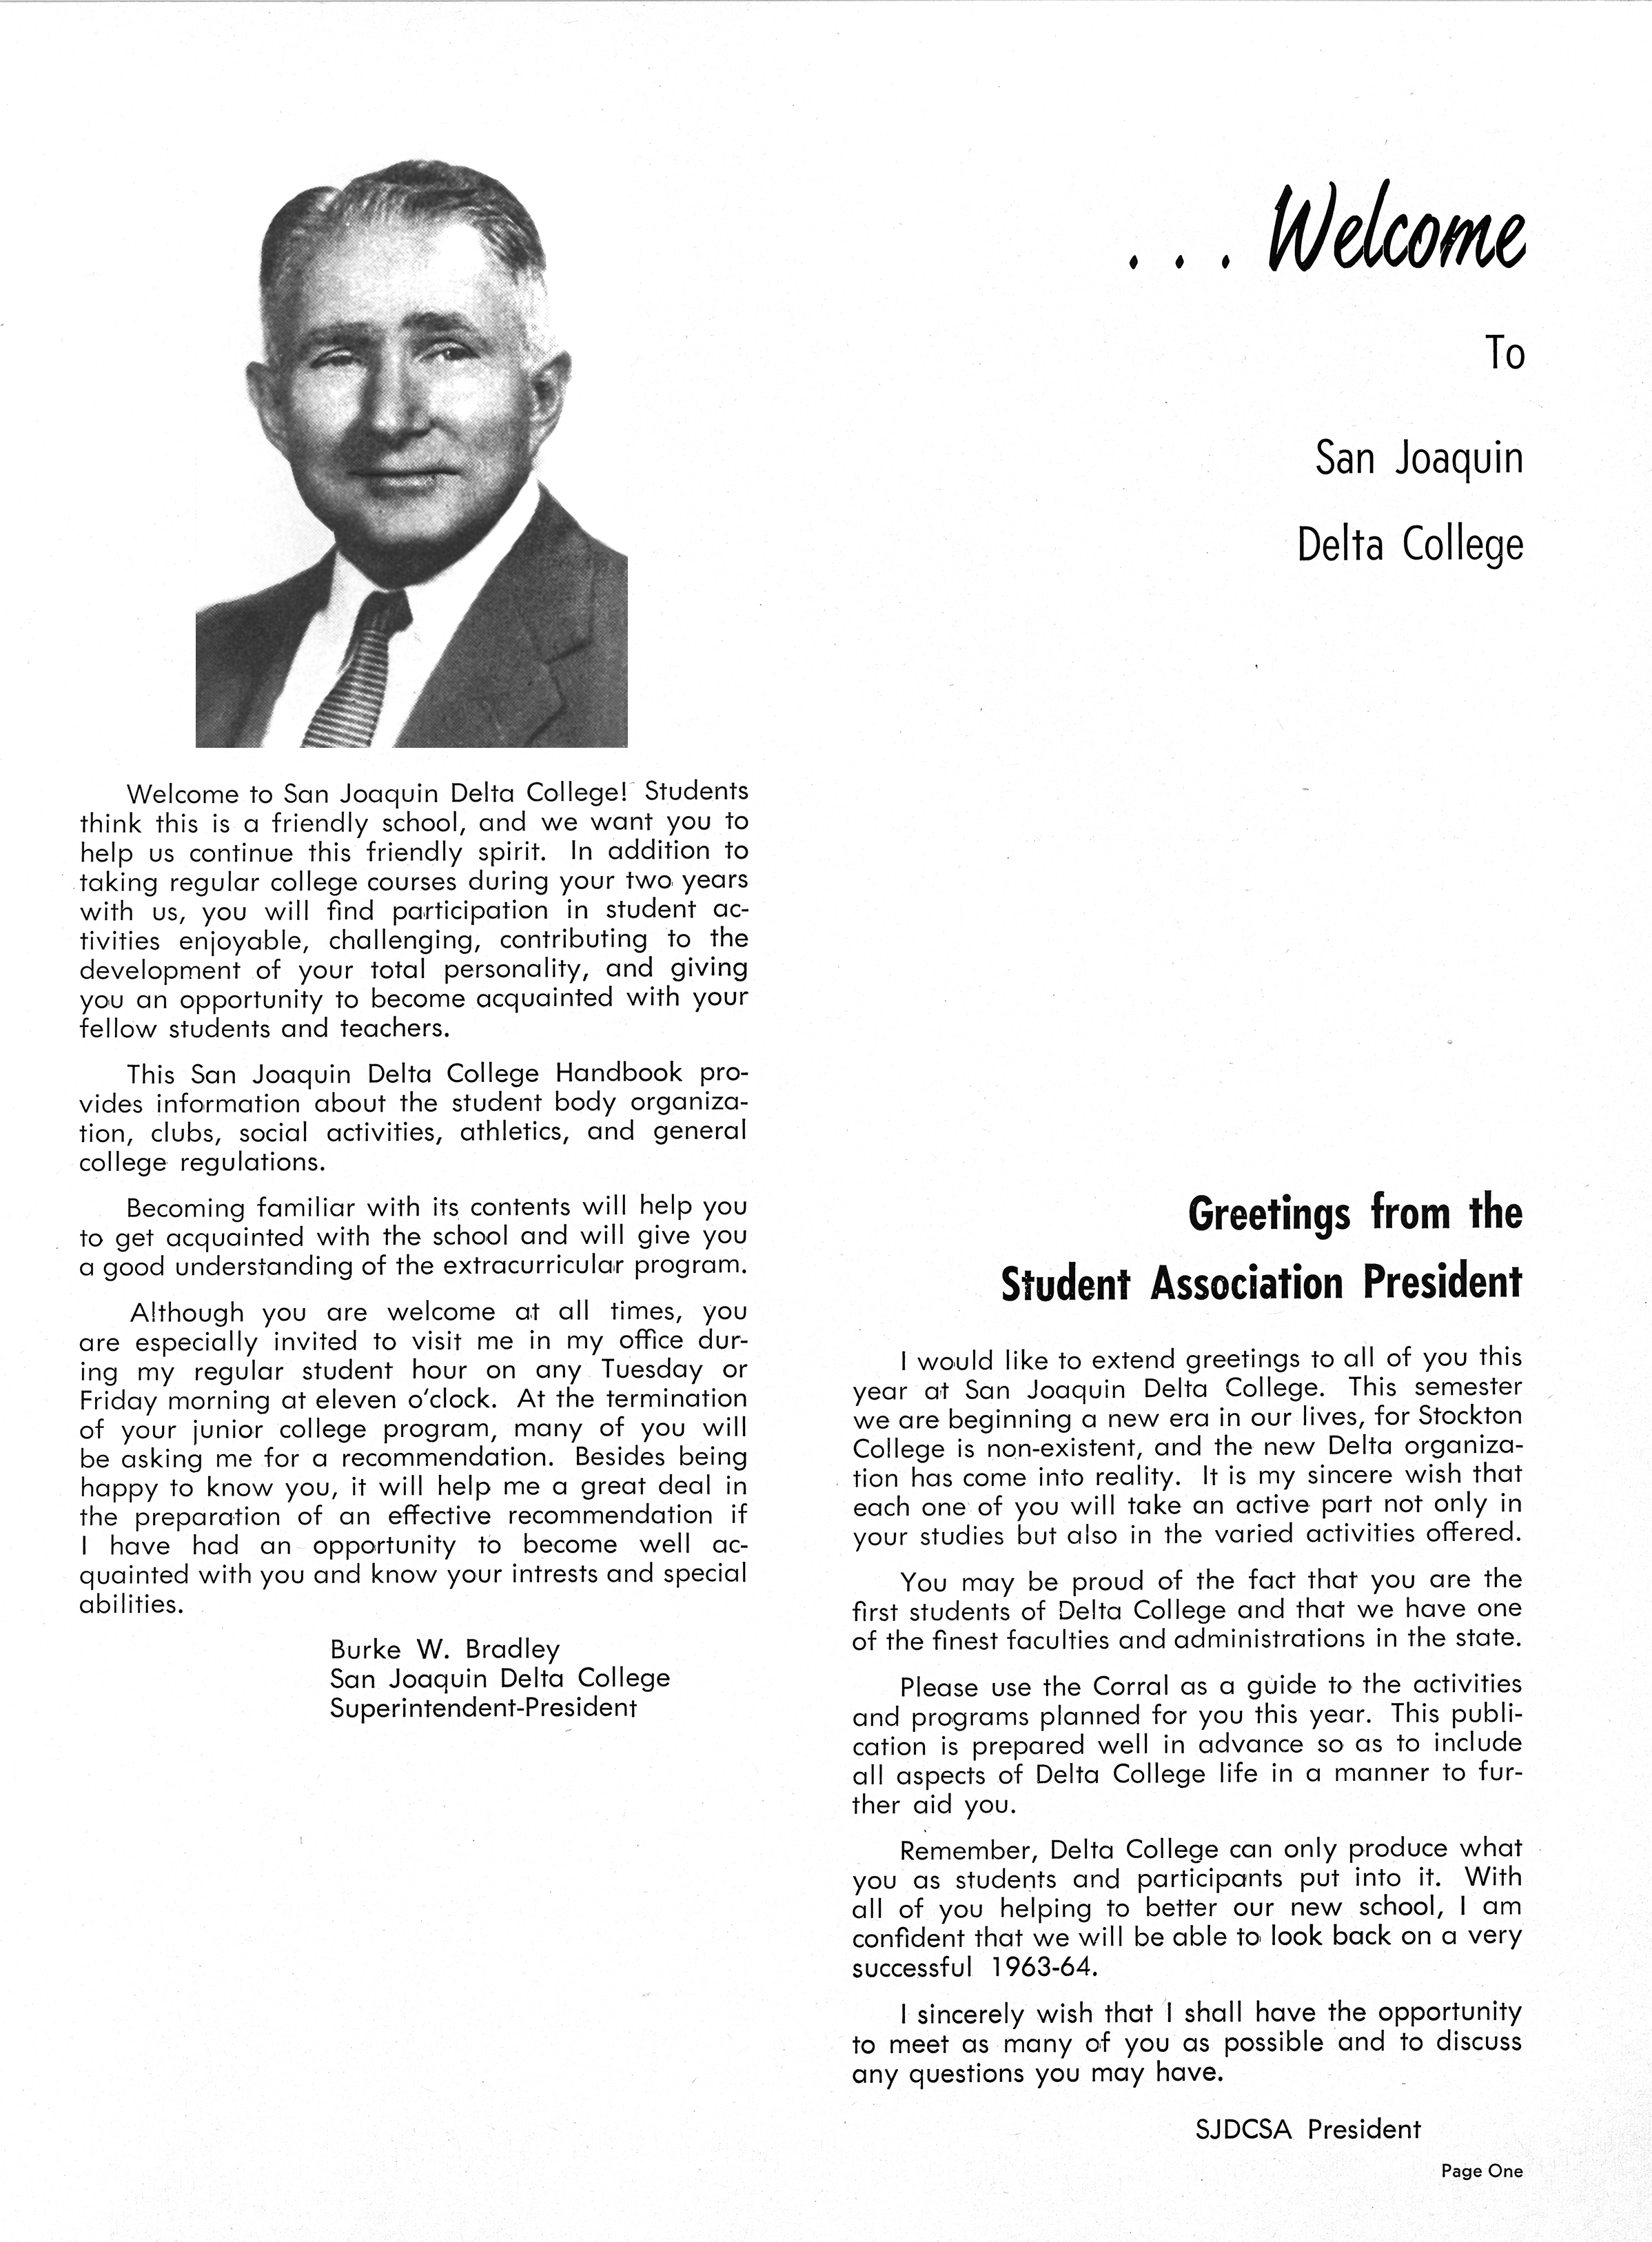 The first page of the 1963-64 Delta College catalog, featuring a message by College President Dr. Burke Bradley